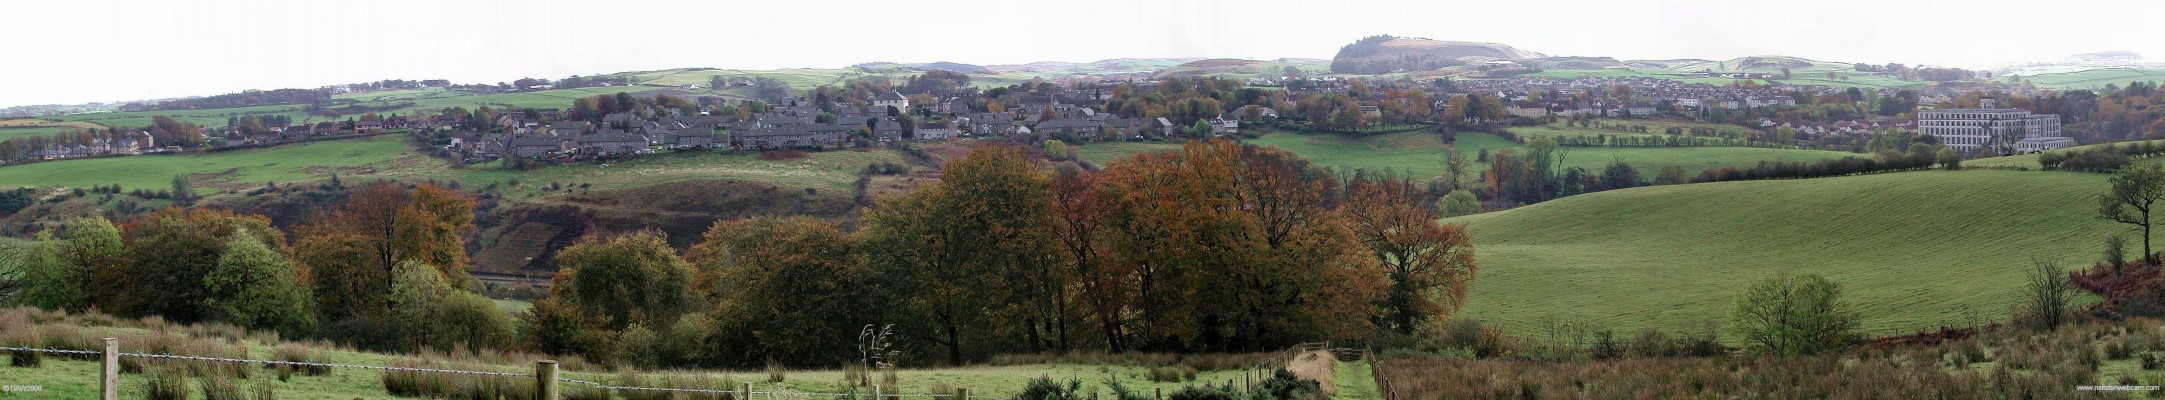 Autumn Panorama from Killoch Glen
An autumn view over looking Neilston from the top of Killoch Glen taken in 2005.  Crofthead Mill is on the extreme left.  The Neilston Pad is on the horizon right of centre.  [url=http://www.streetmap.co.uk/map.srf?X=247929&Y=658194&A=Y&Z=120/] Map location. [/url]
